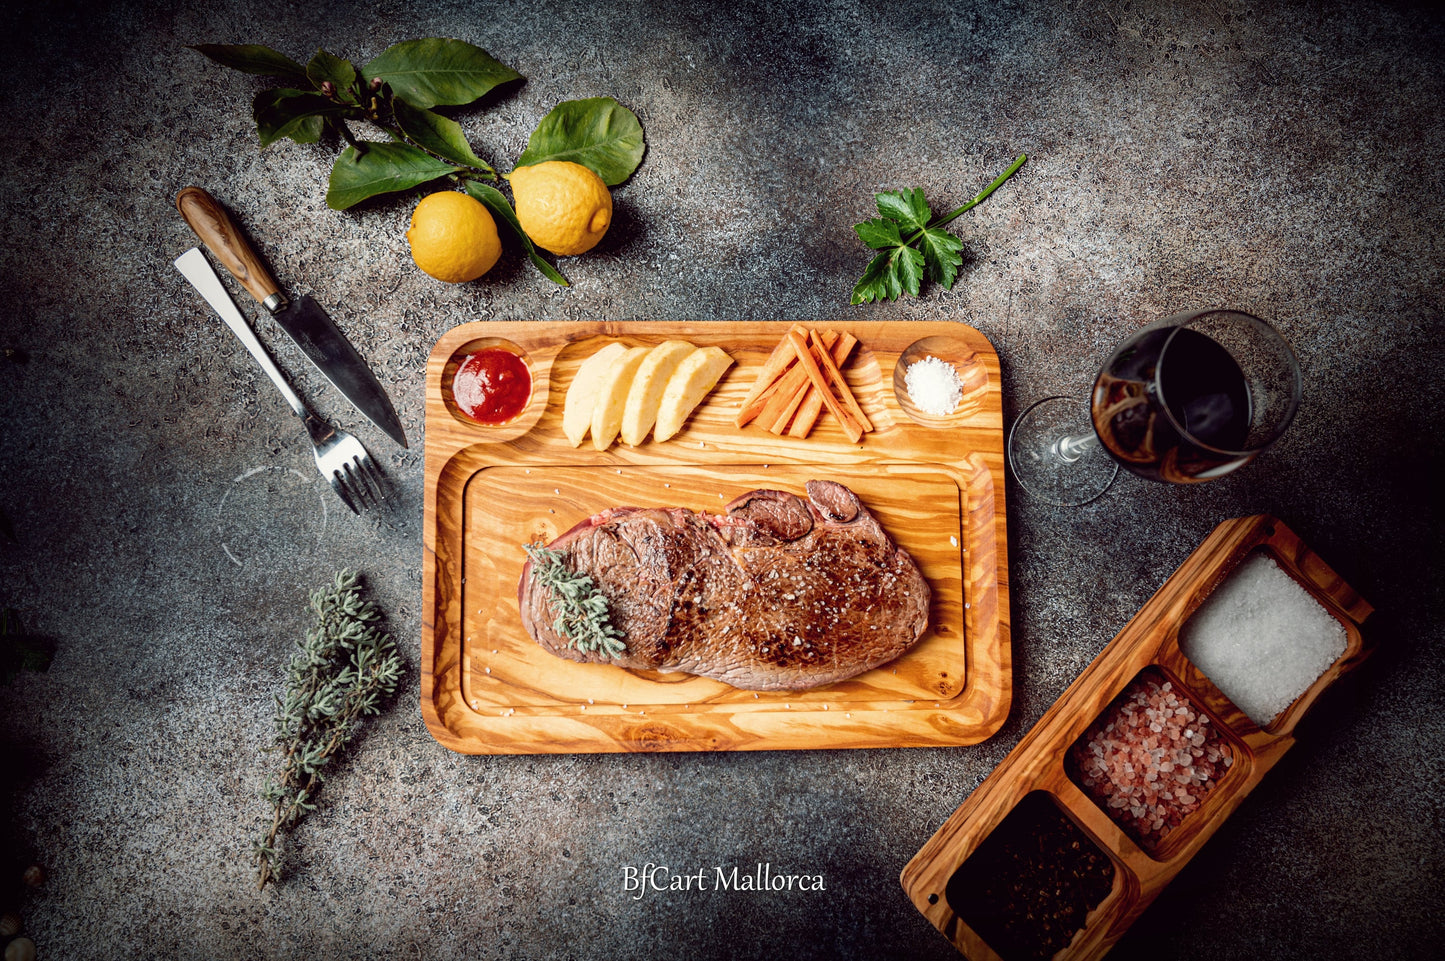 Steak Board for Meat and Barbecues, Steak Plate with Juice Channel, Olive Wood Steak Plate, Steak and BBQ Meals Serving Board, Grill Plate